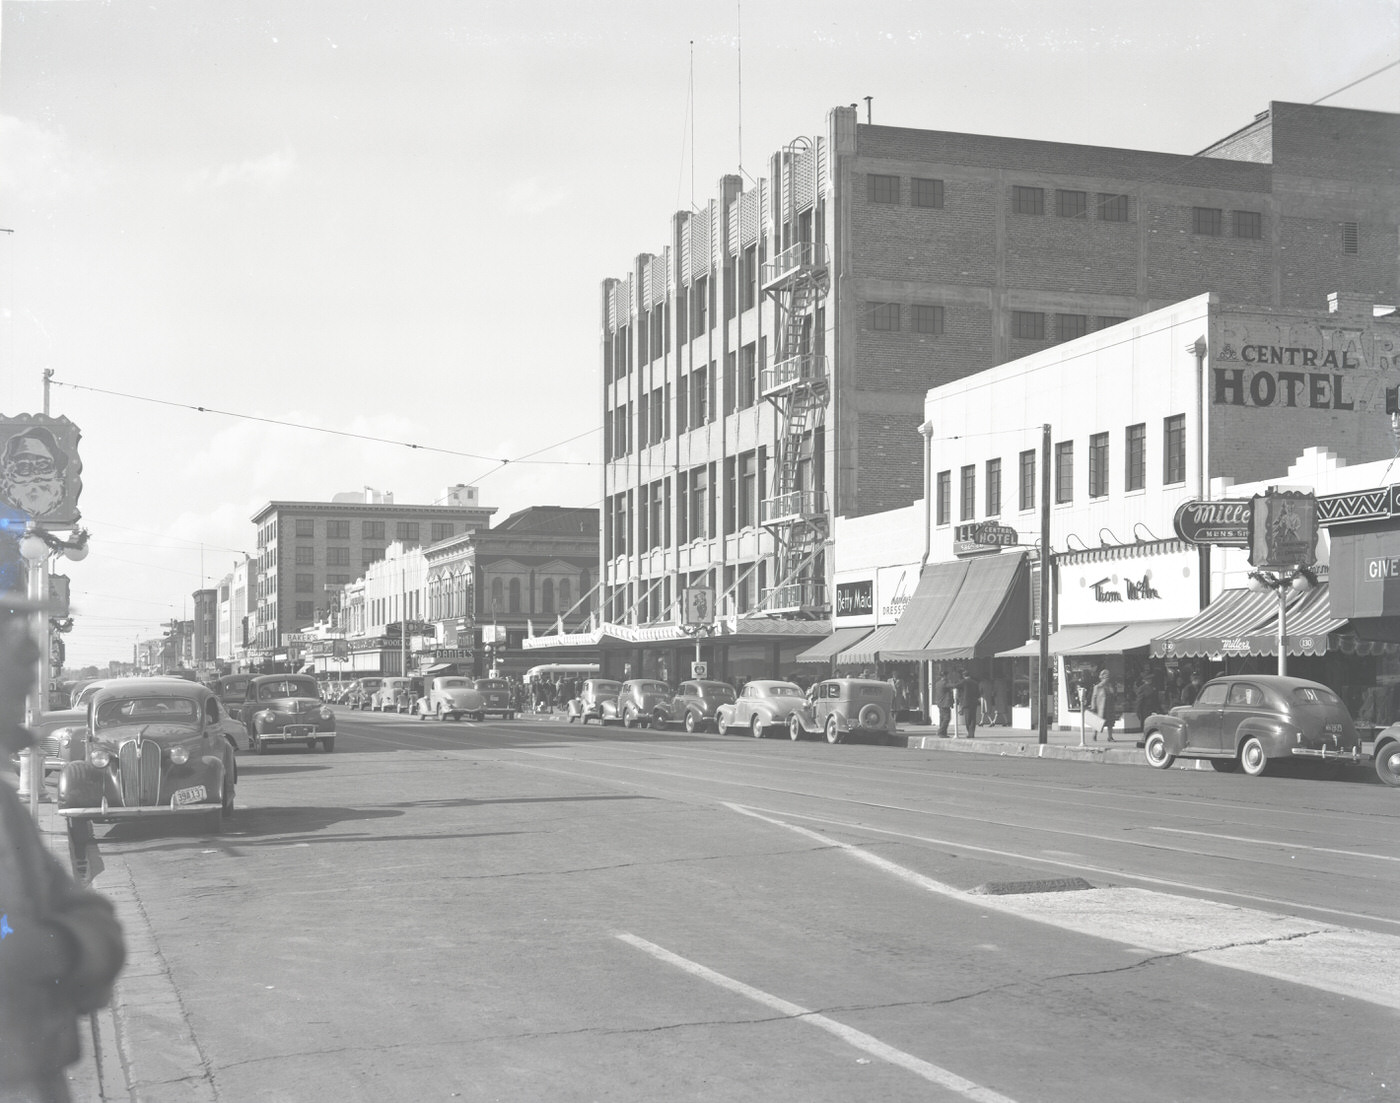 View looking west down E. Washington St. The Central Hotel (222 1/4 E. Washington) and Betty Maid (120 E. Washington) are visible, 1943